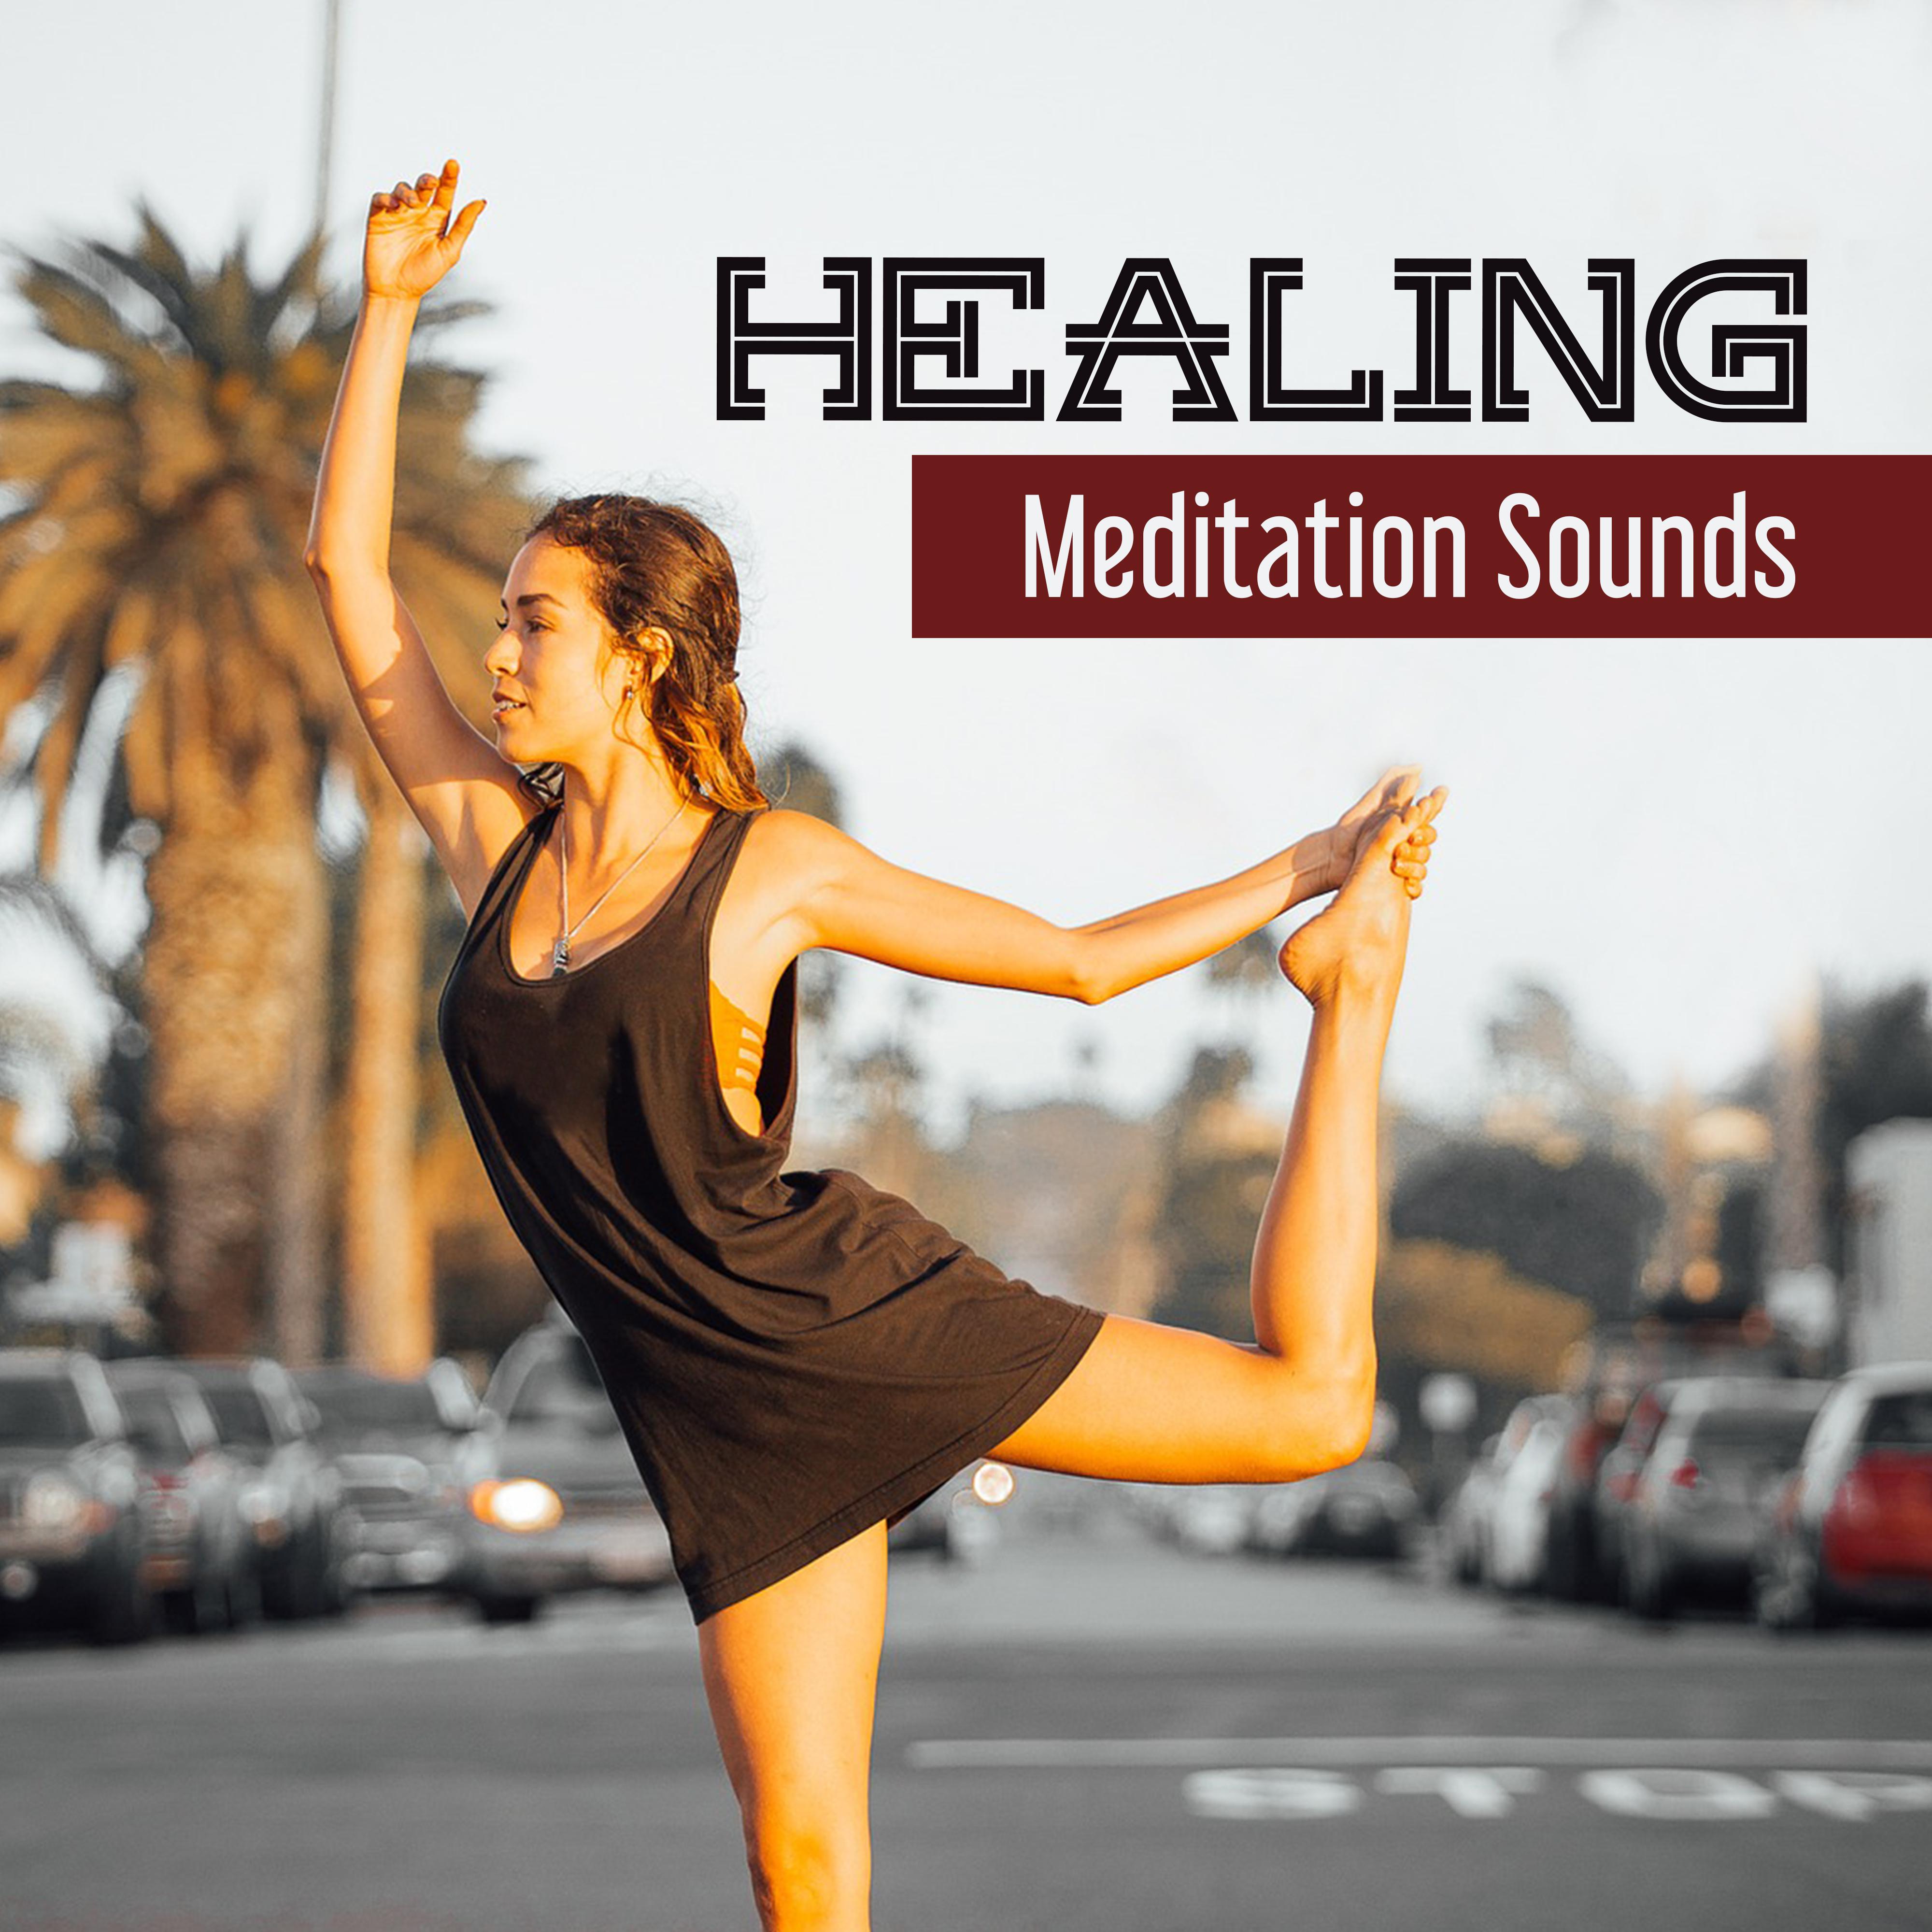 Healing Meditation Sounds – Calming Waves to Relax, Stress Relief, Music to Meditate